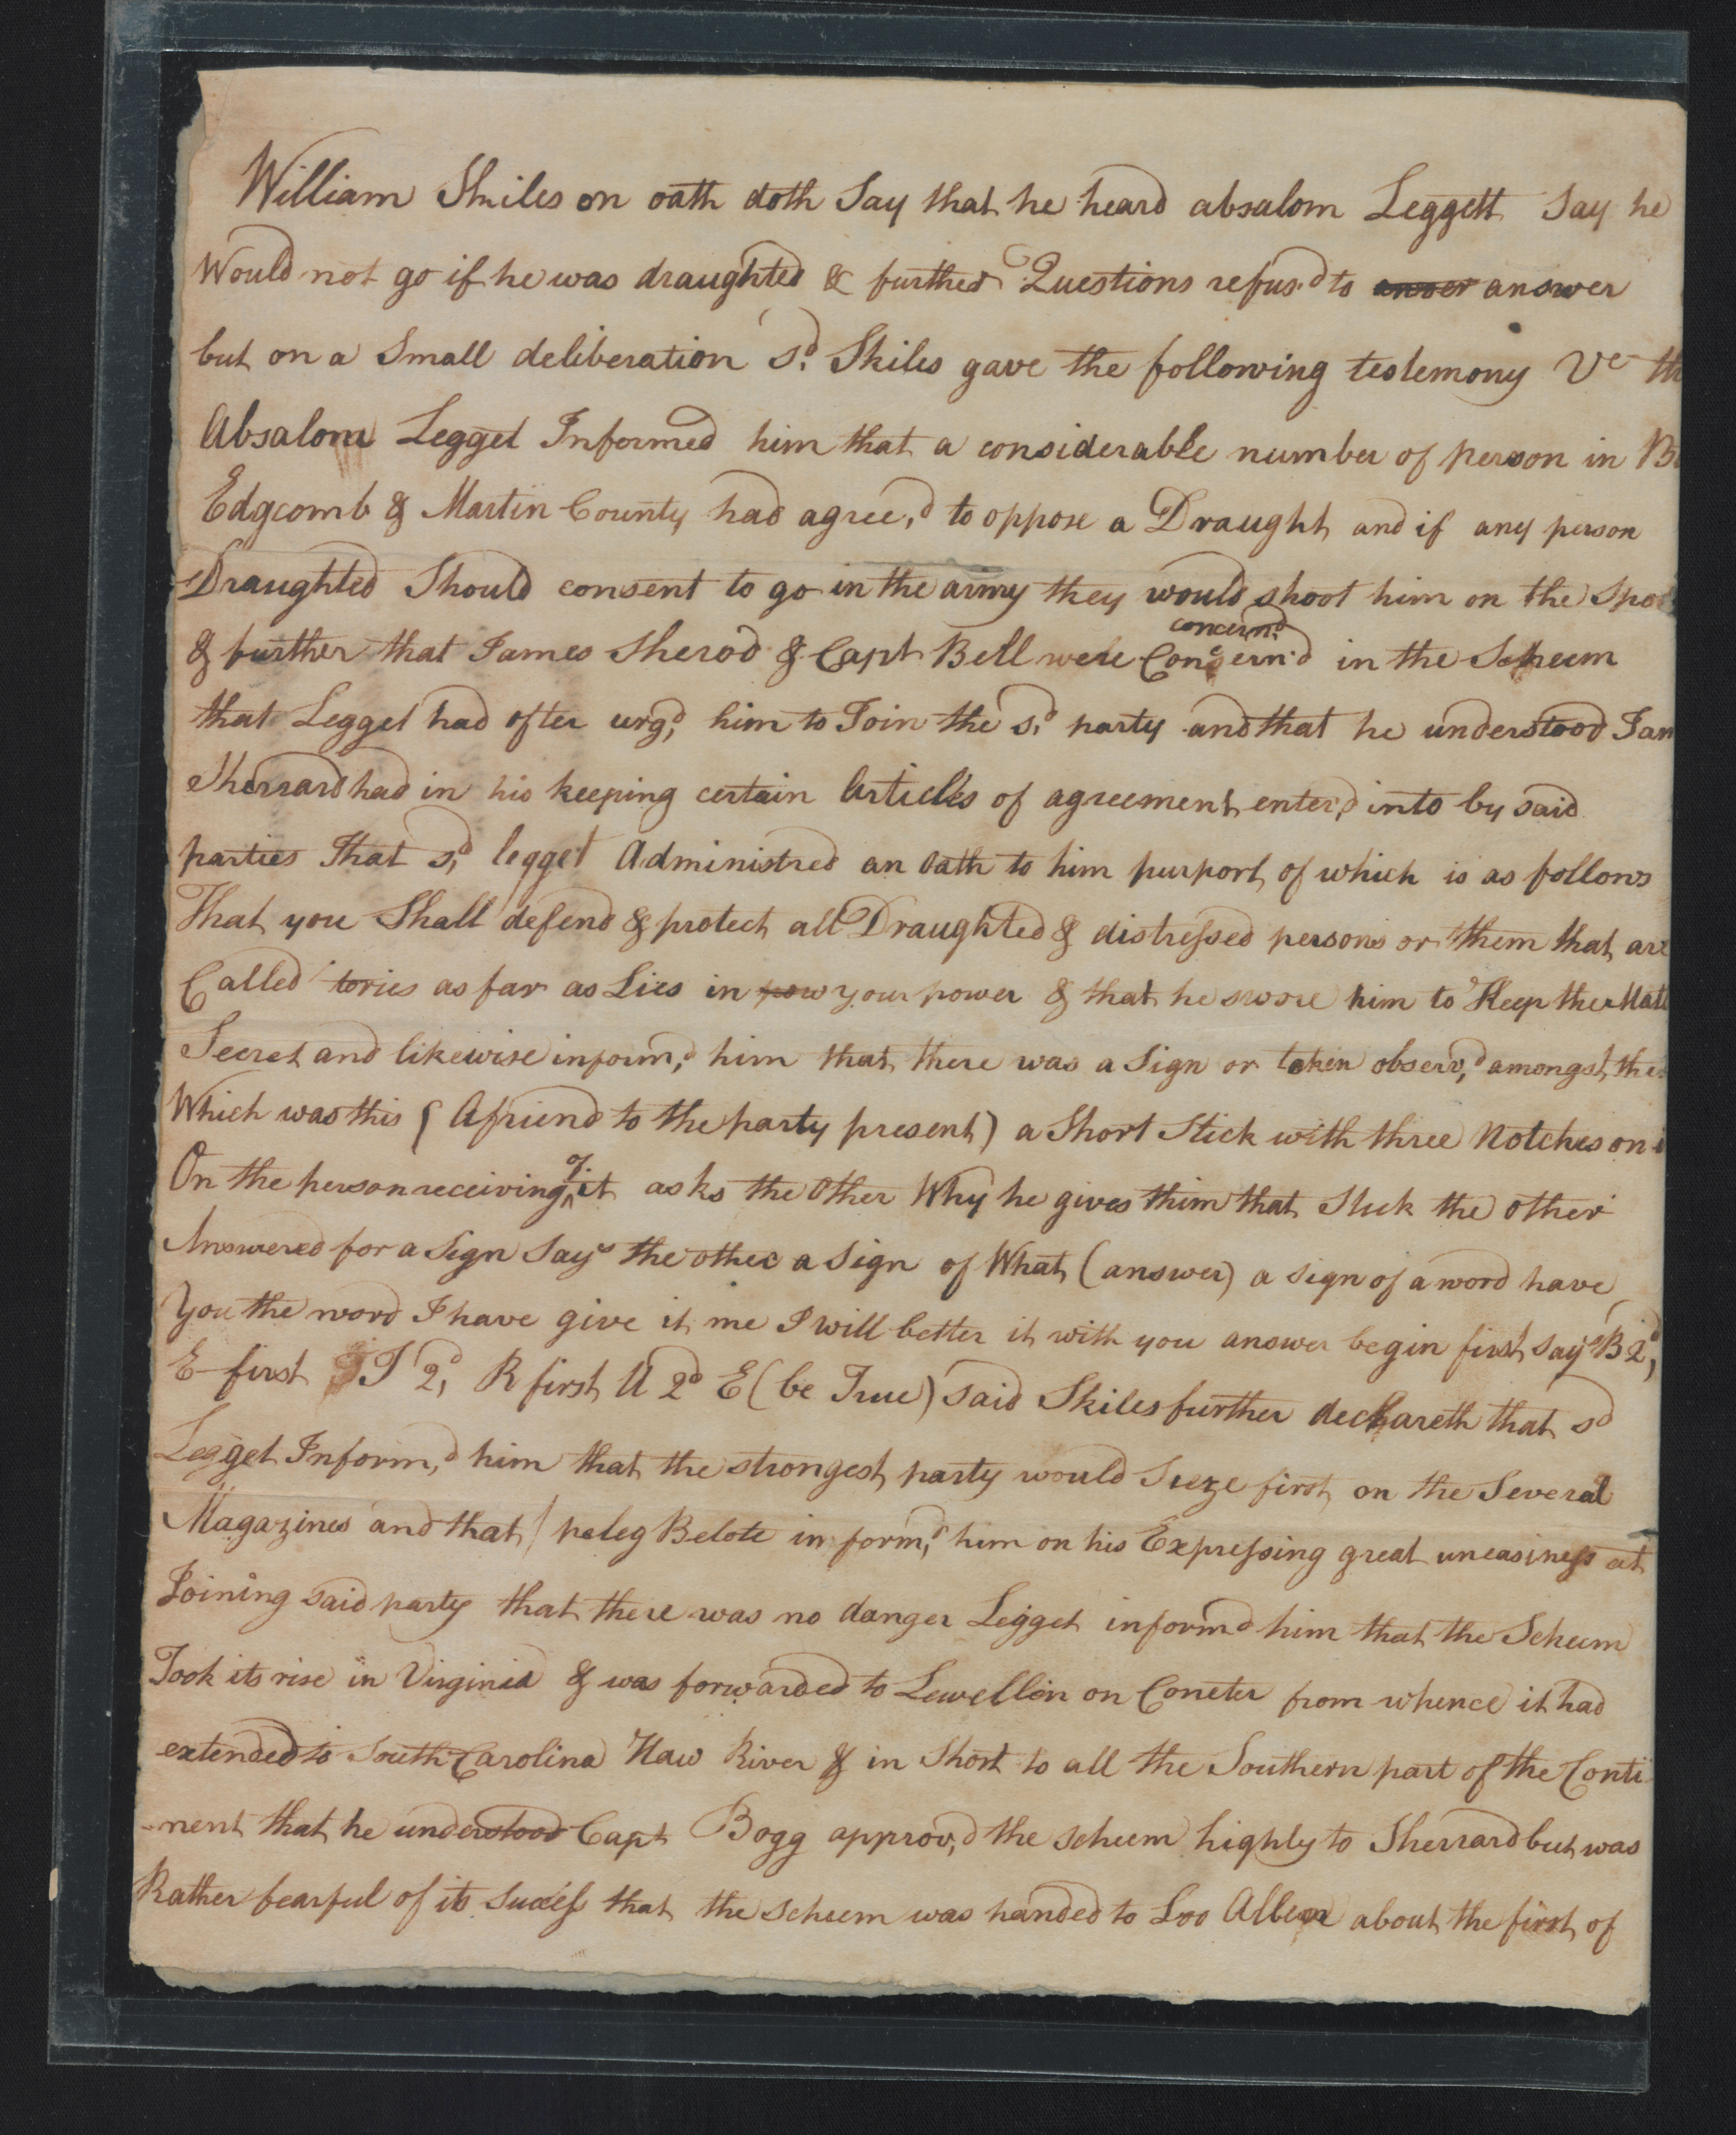 Deposition of William Skyles, circa 1 July 1777, page 1